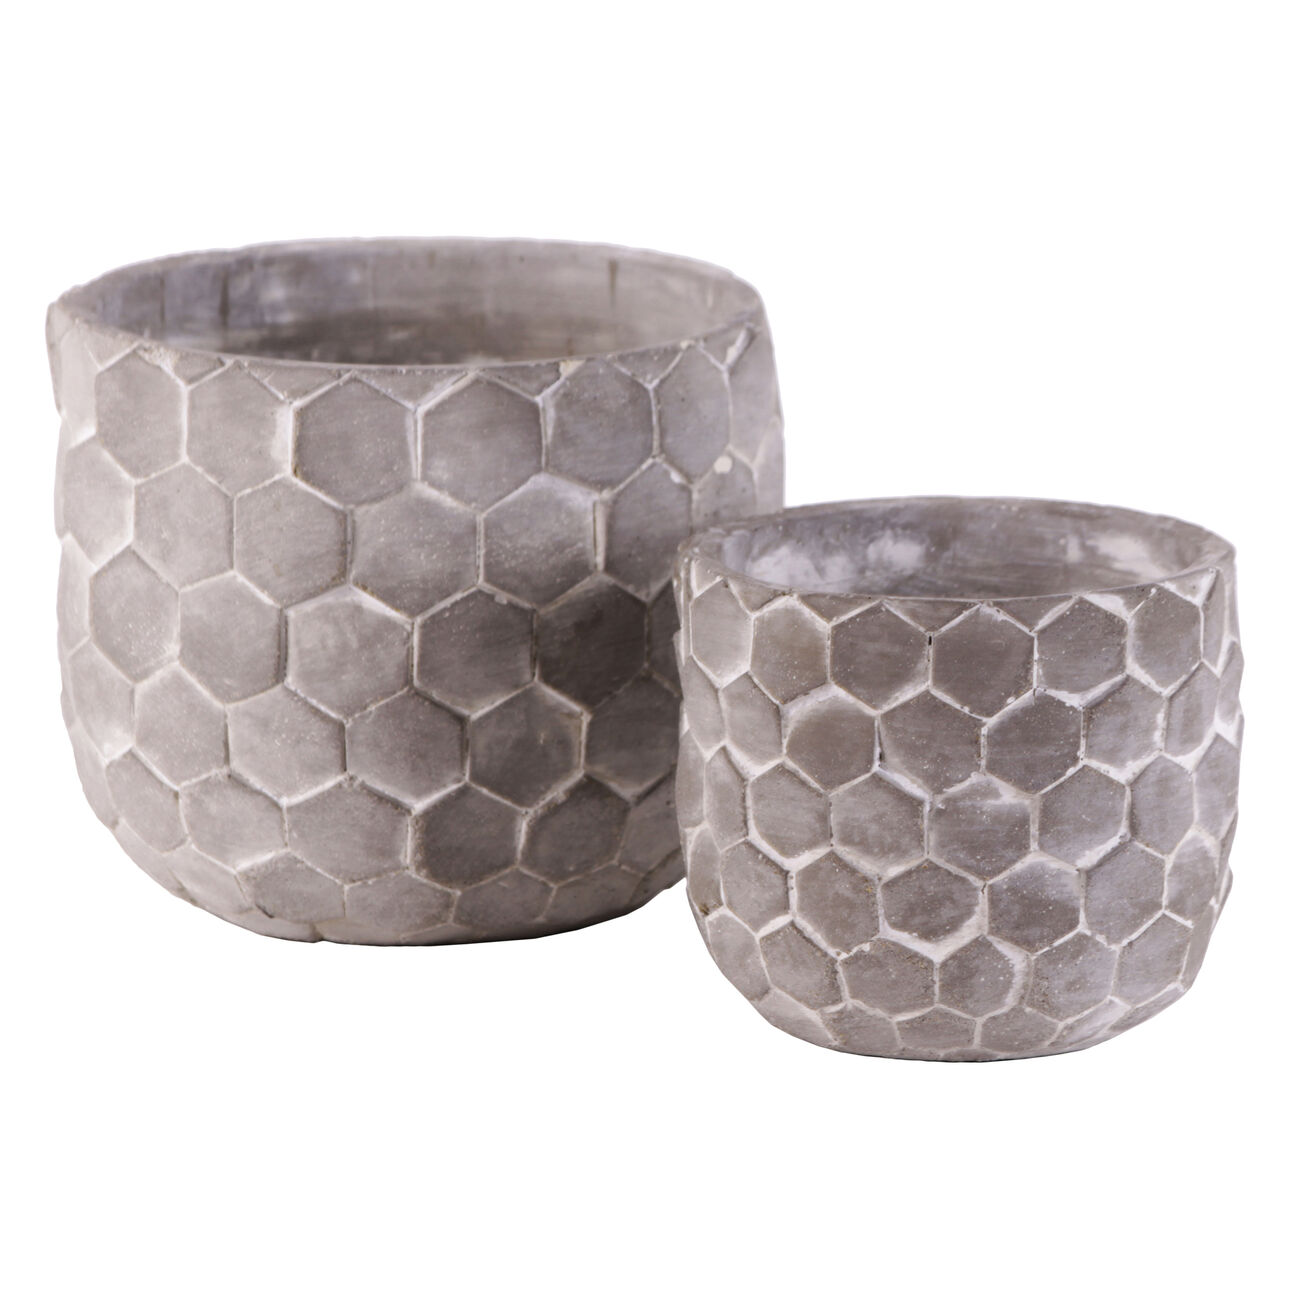 Round Cement Pot with Embossed Hexagonal Design, Set of 2, Washed Gray